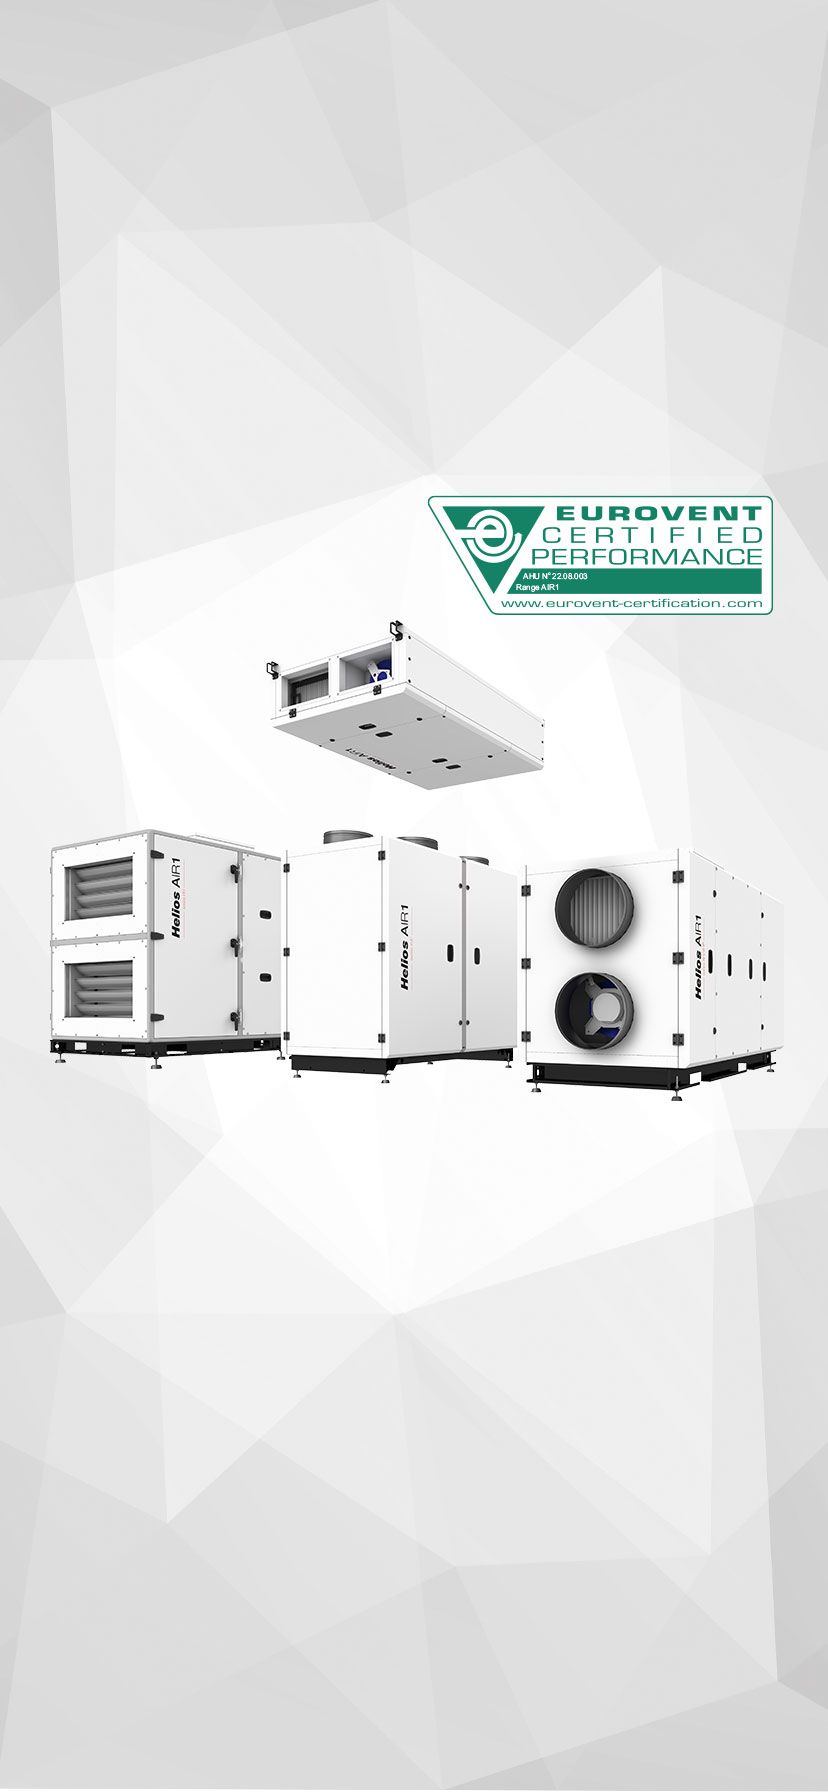 Fans and ventilation systems for residential, industrial